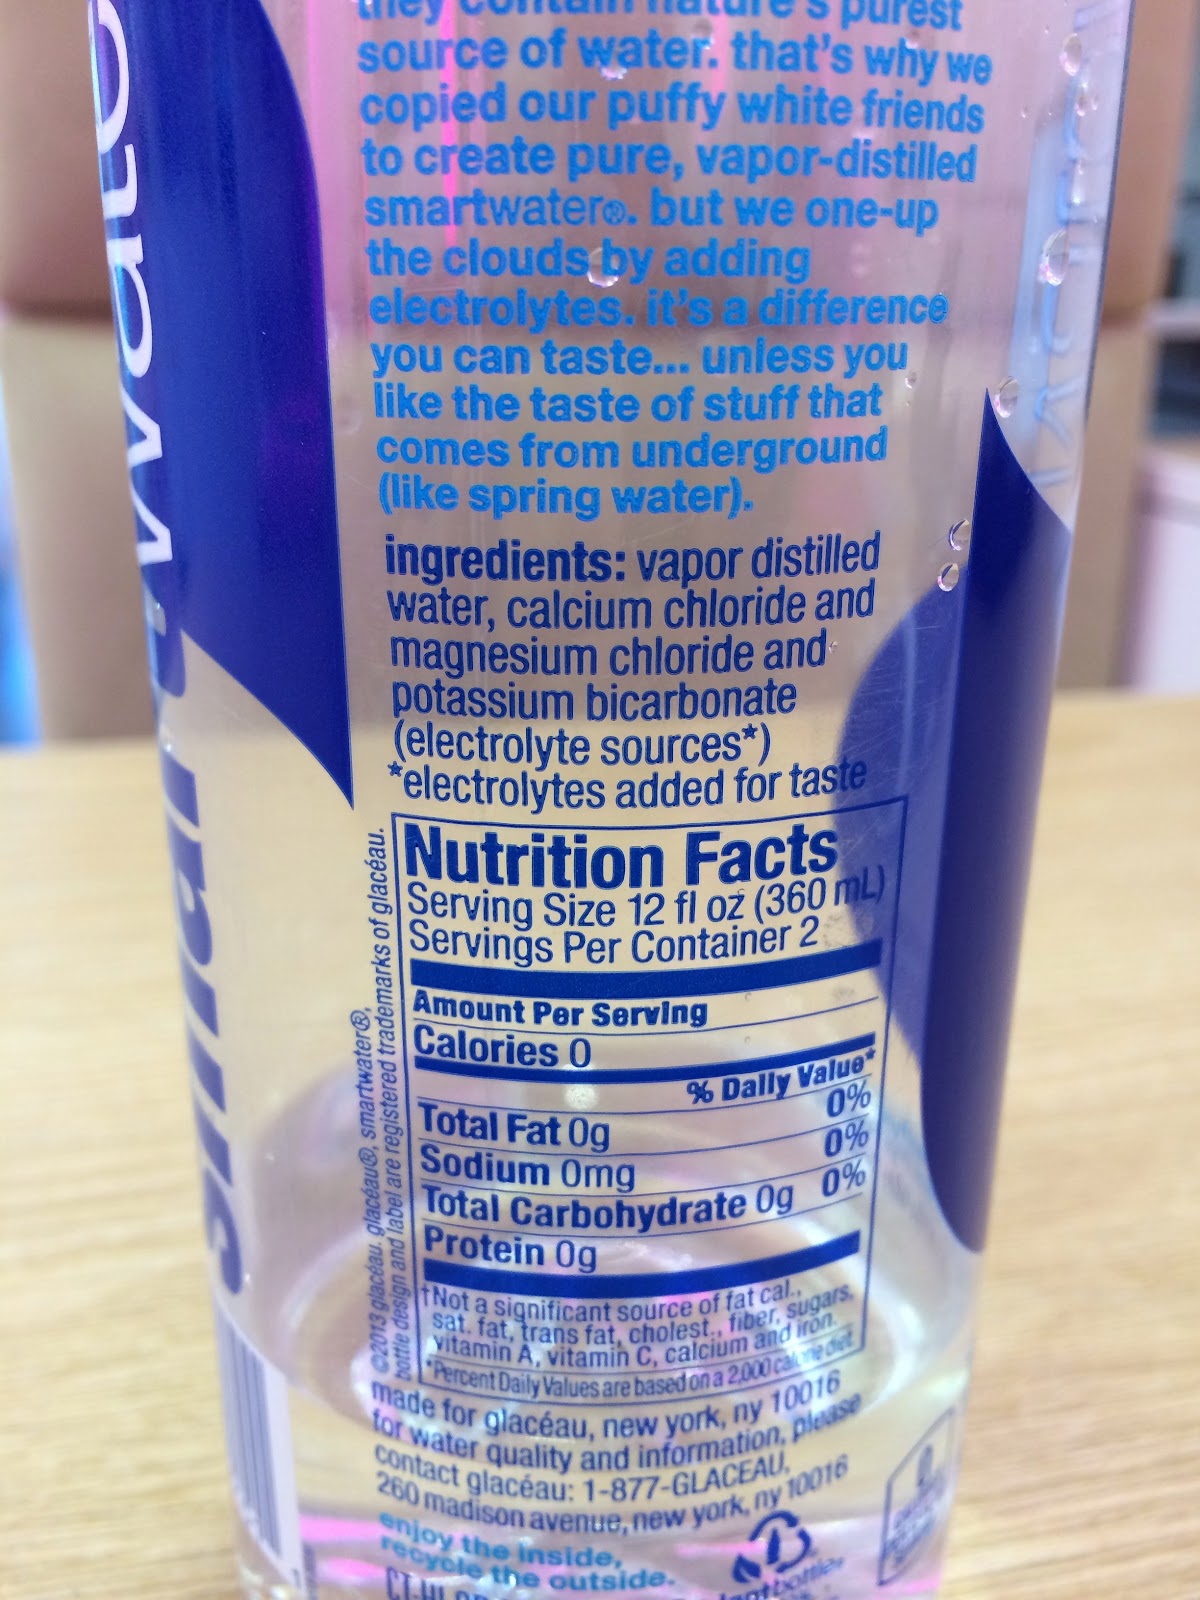 is smartwater bpa free?